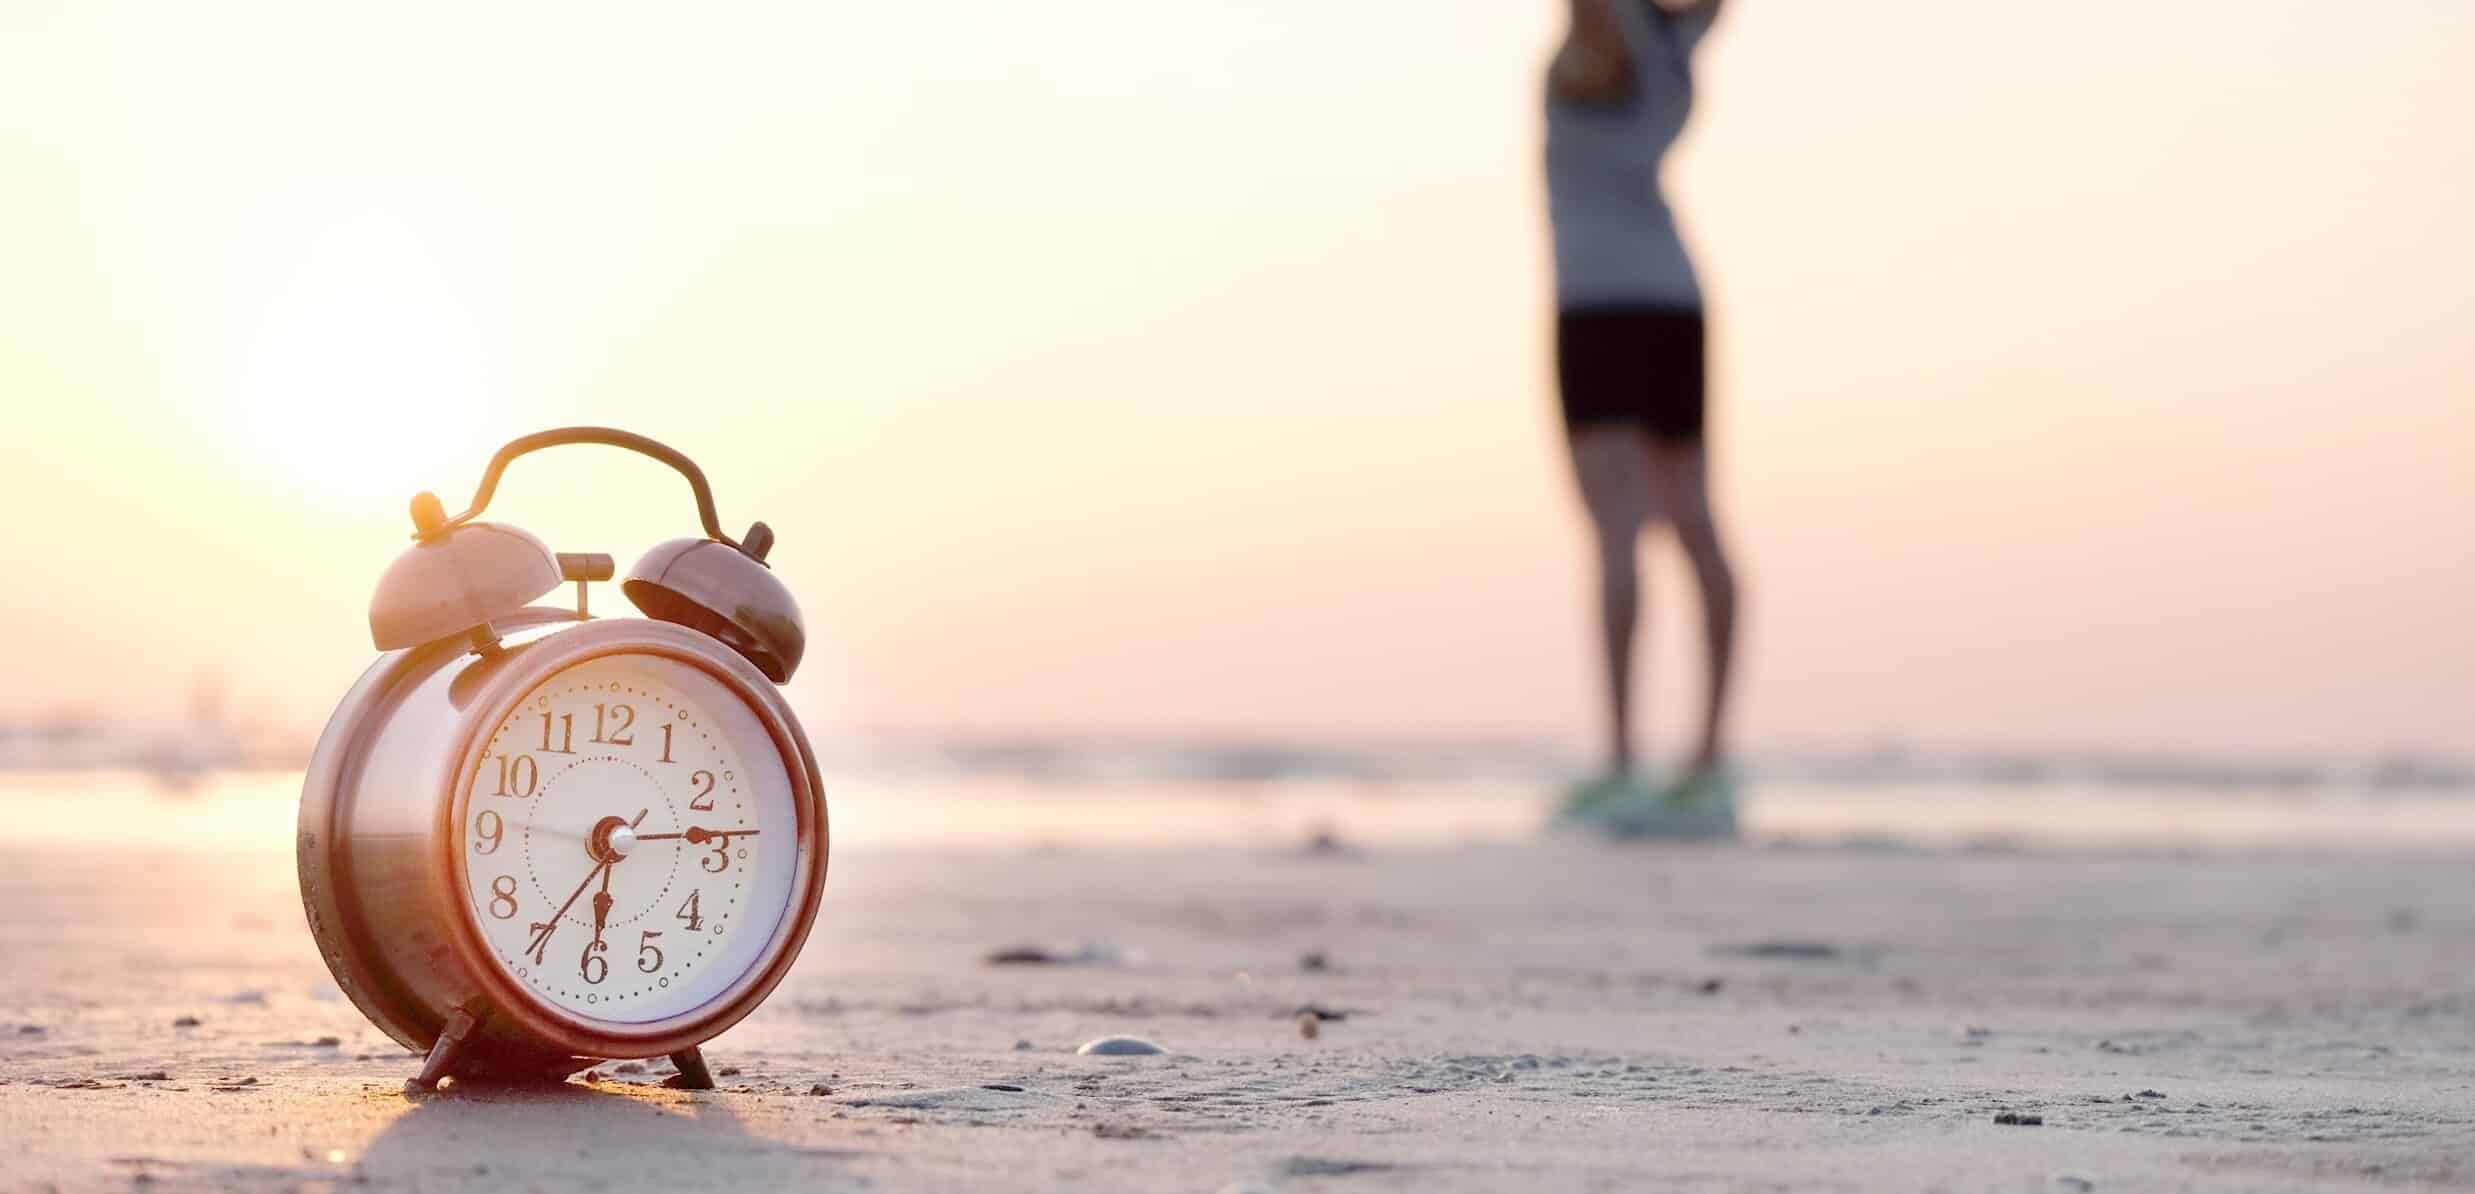 Active person on beach with alarm clock in view